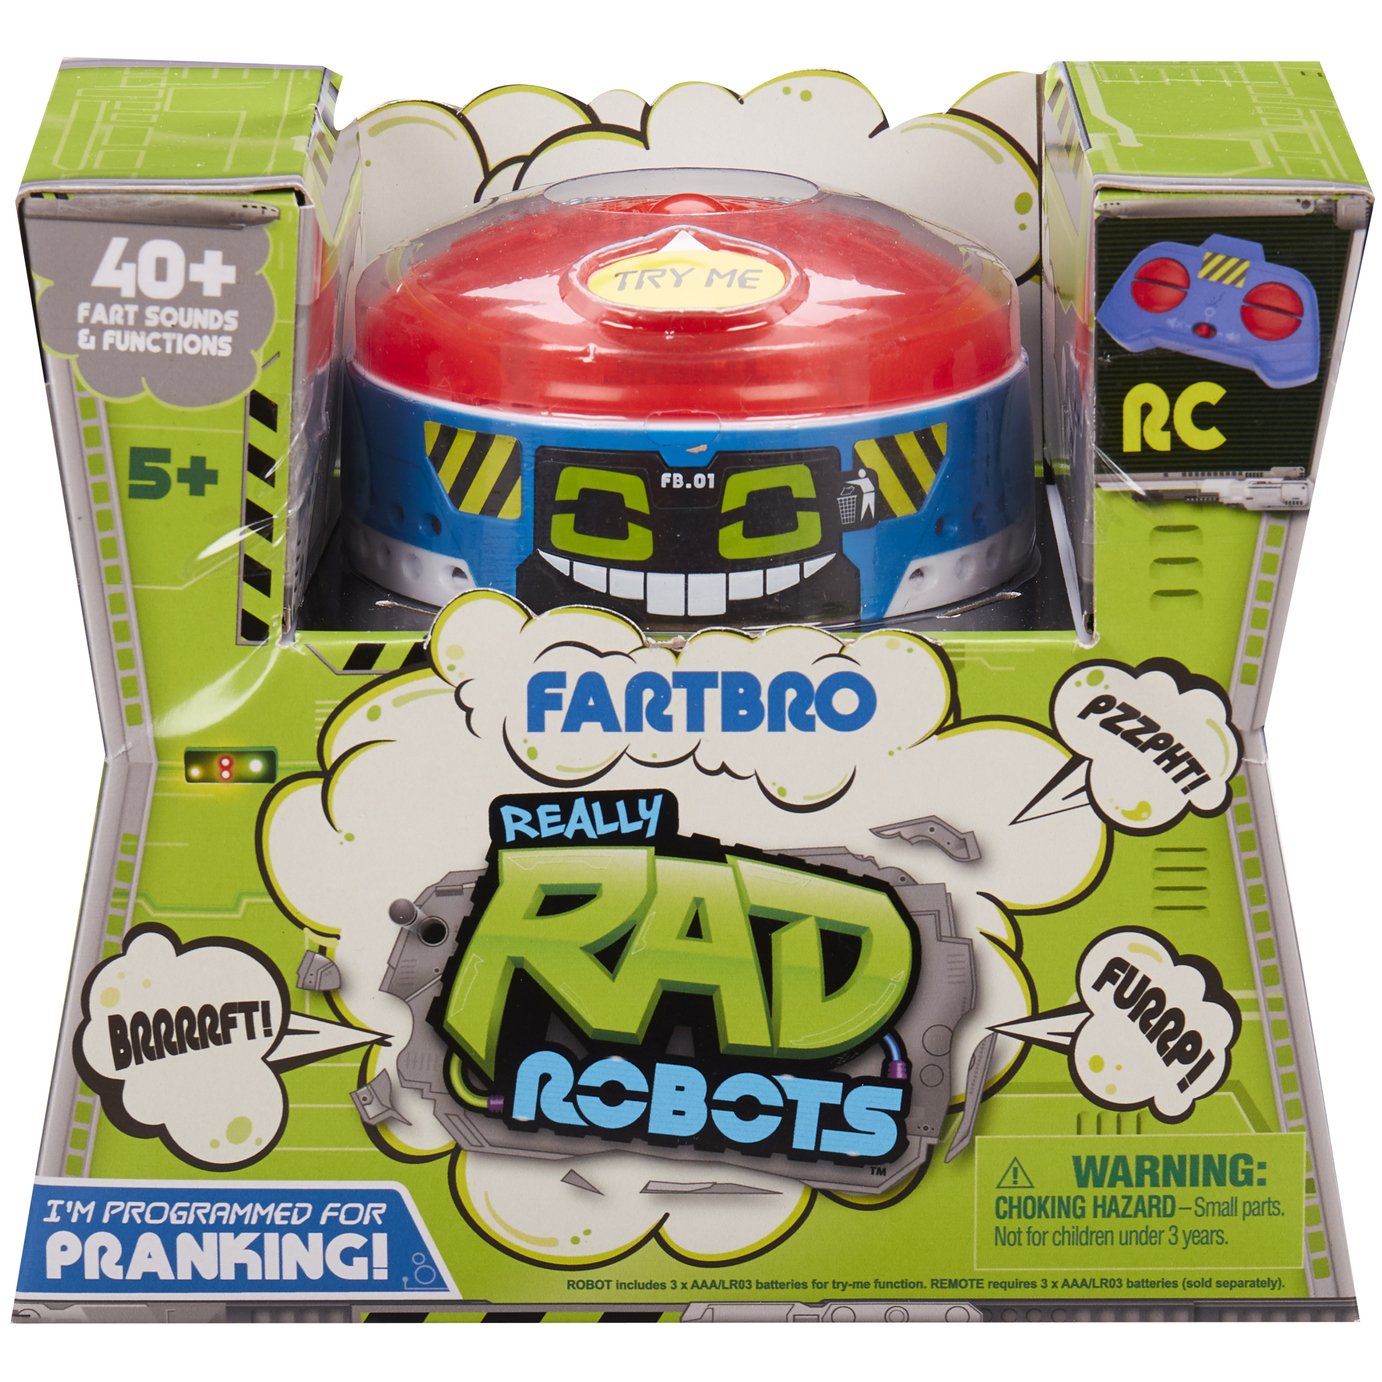 Really R.A.D. Robots Review